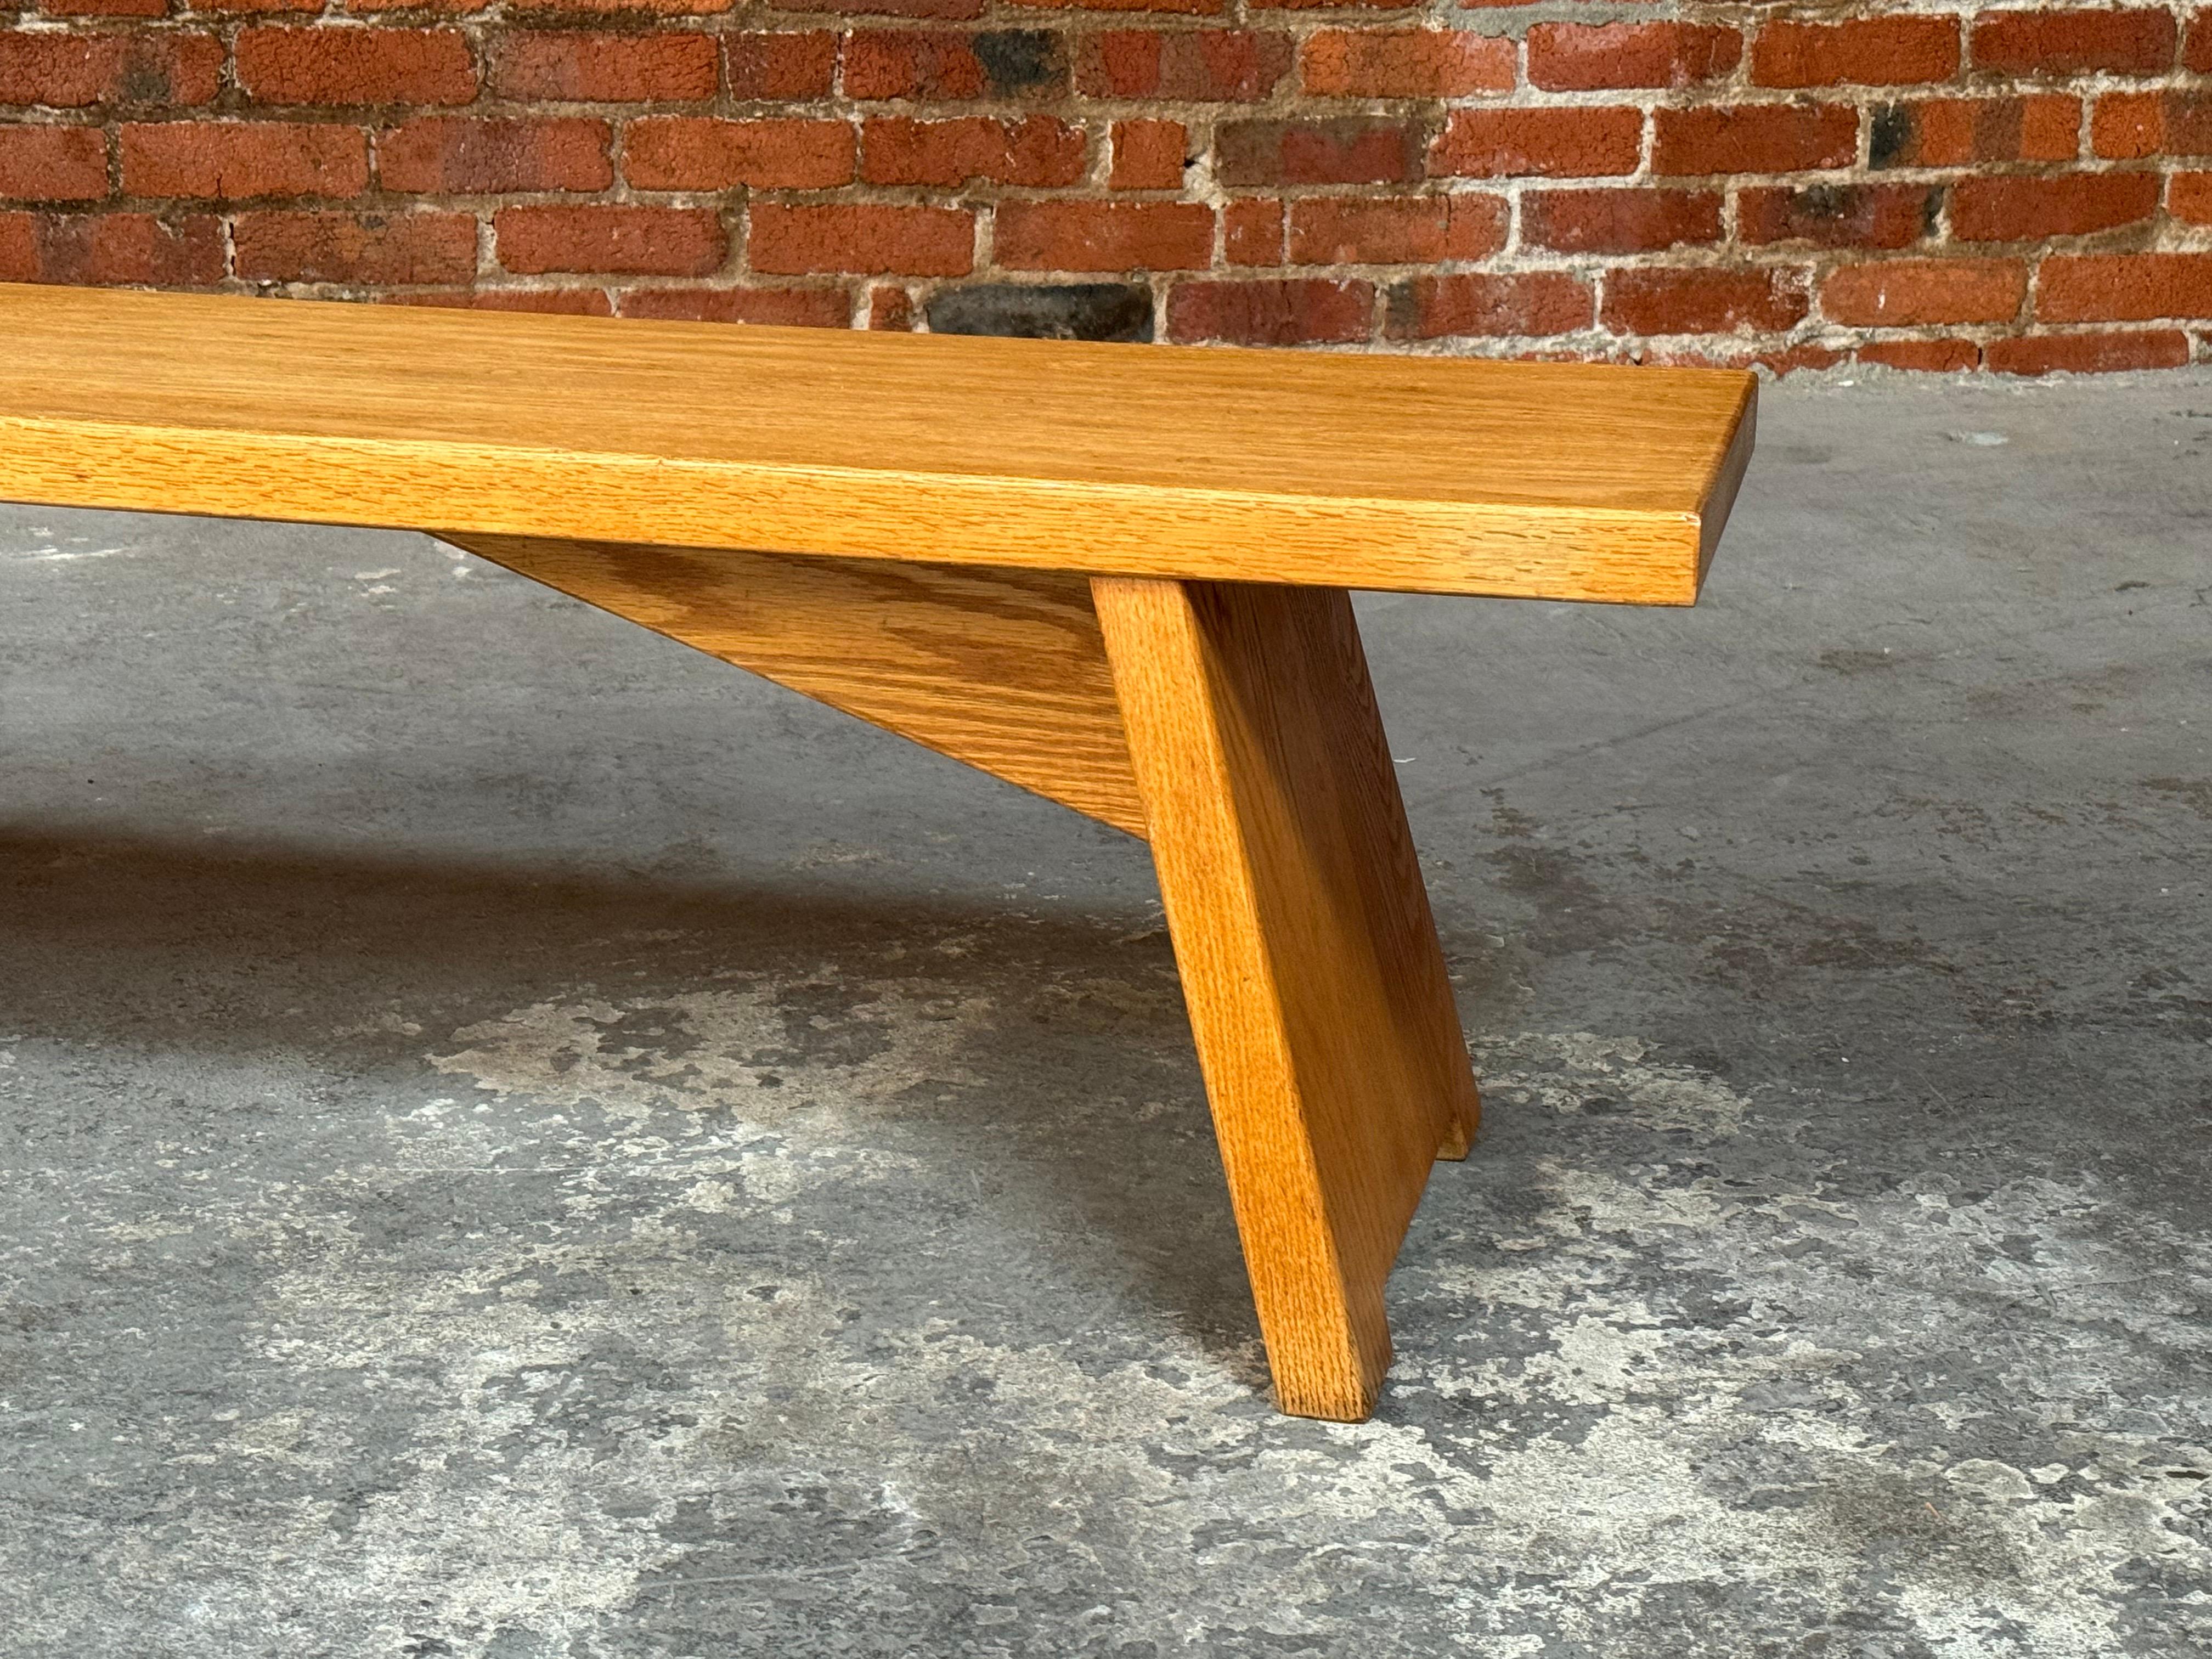 Handmade  solid oak bench in the style of Pierre Chapo, a slender profile with architectural details to the legs and strut supports on the underside. The bottom of the legs have slight cutout to create openness. The oak has turned into a nice honey